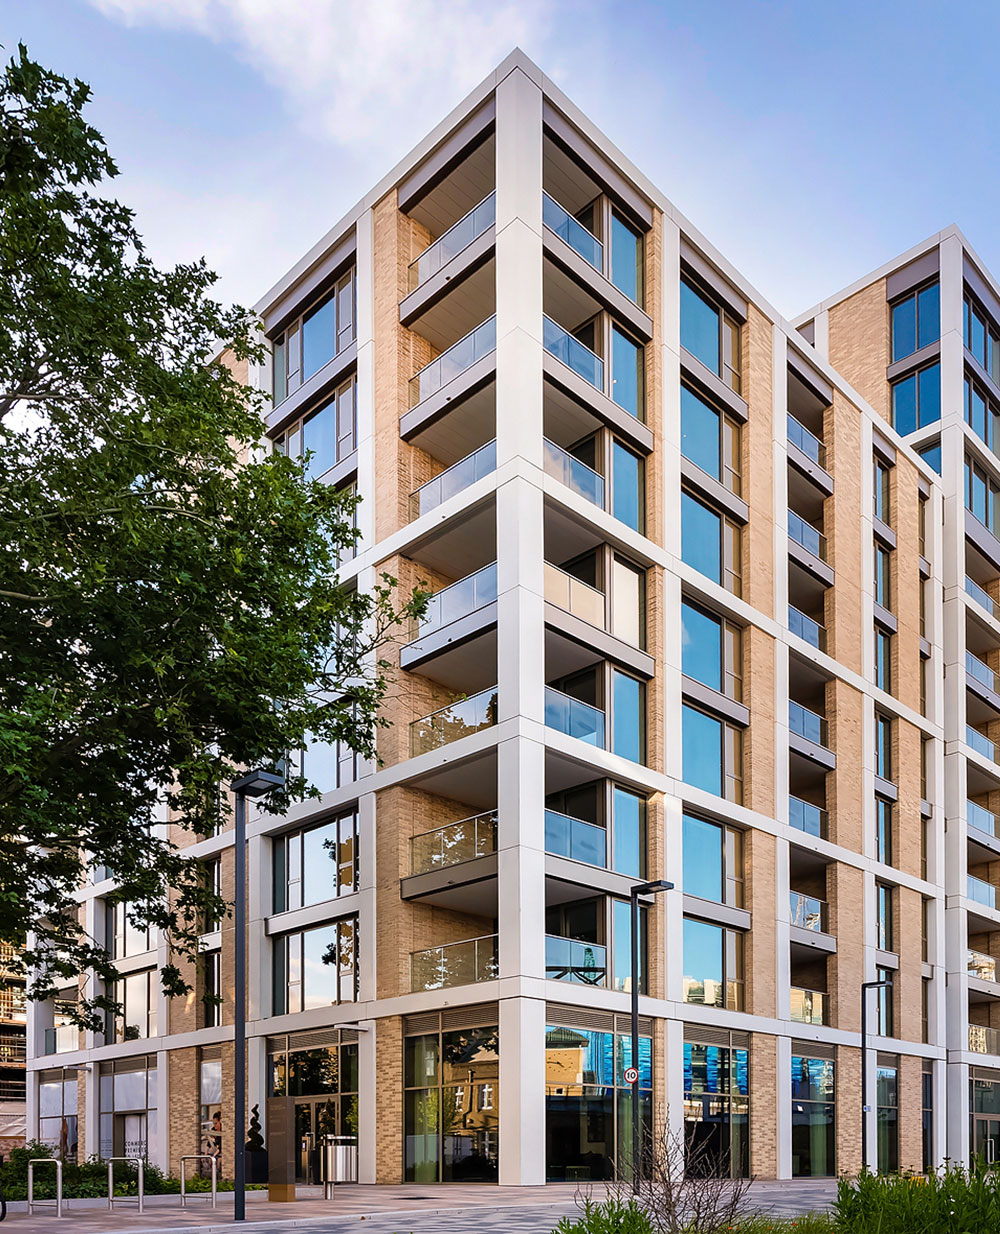 Exterior Views of Prince of Wales Drive, Battersea